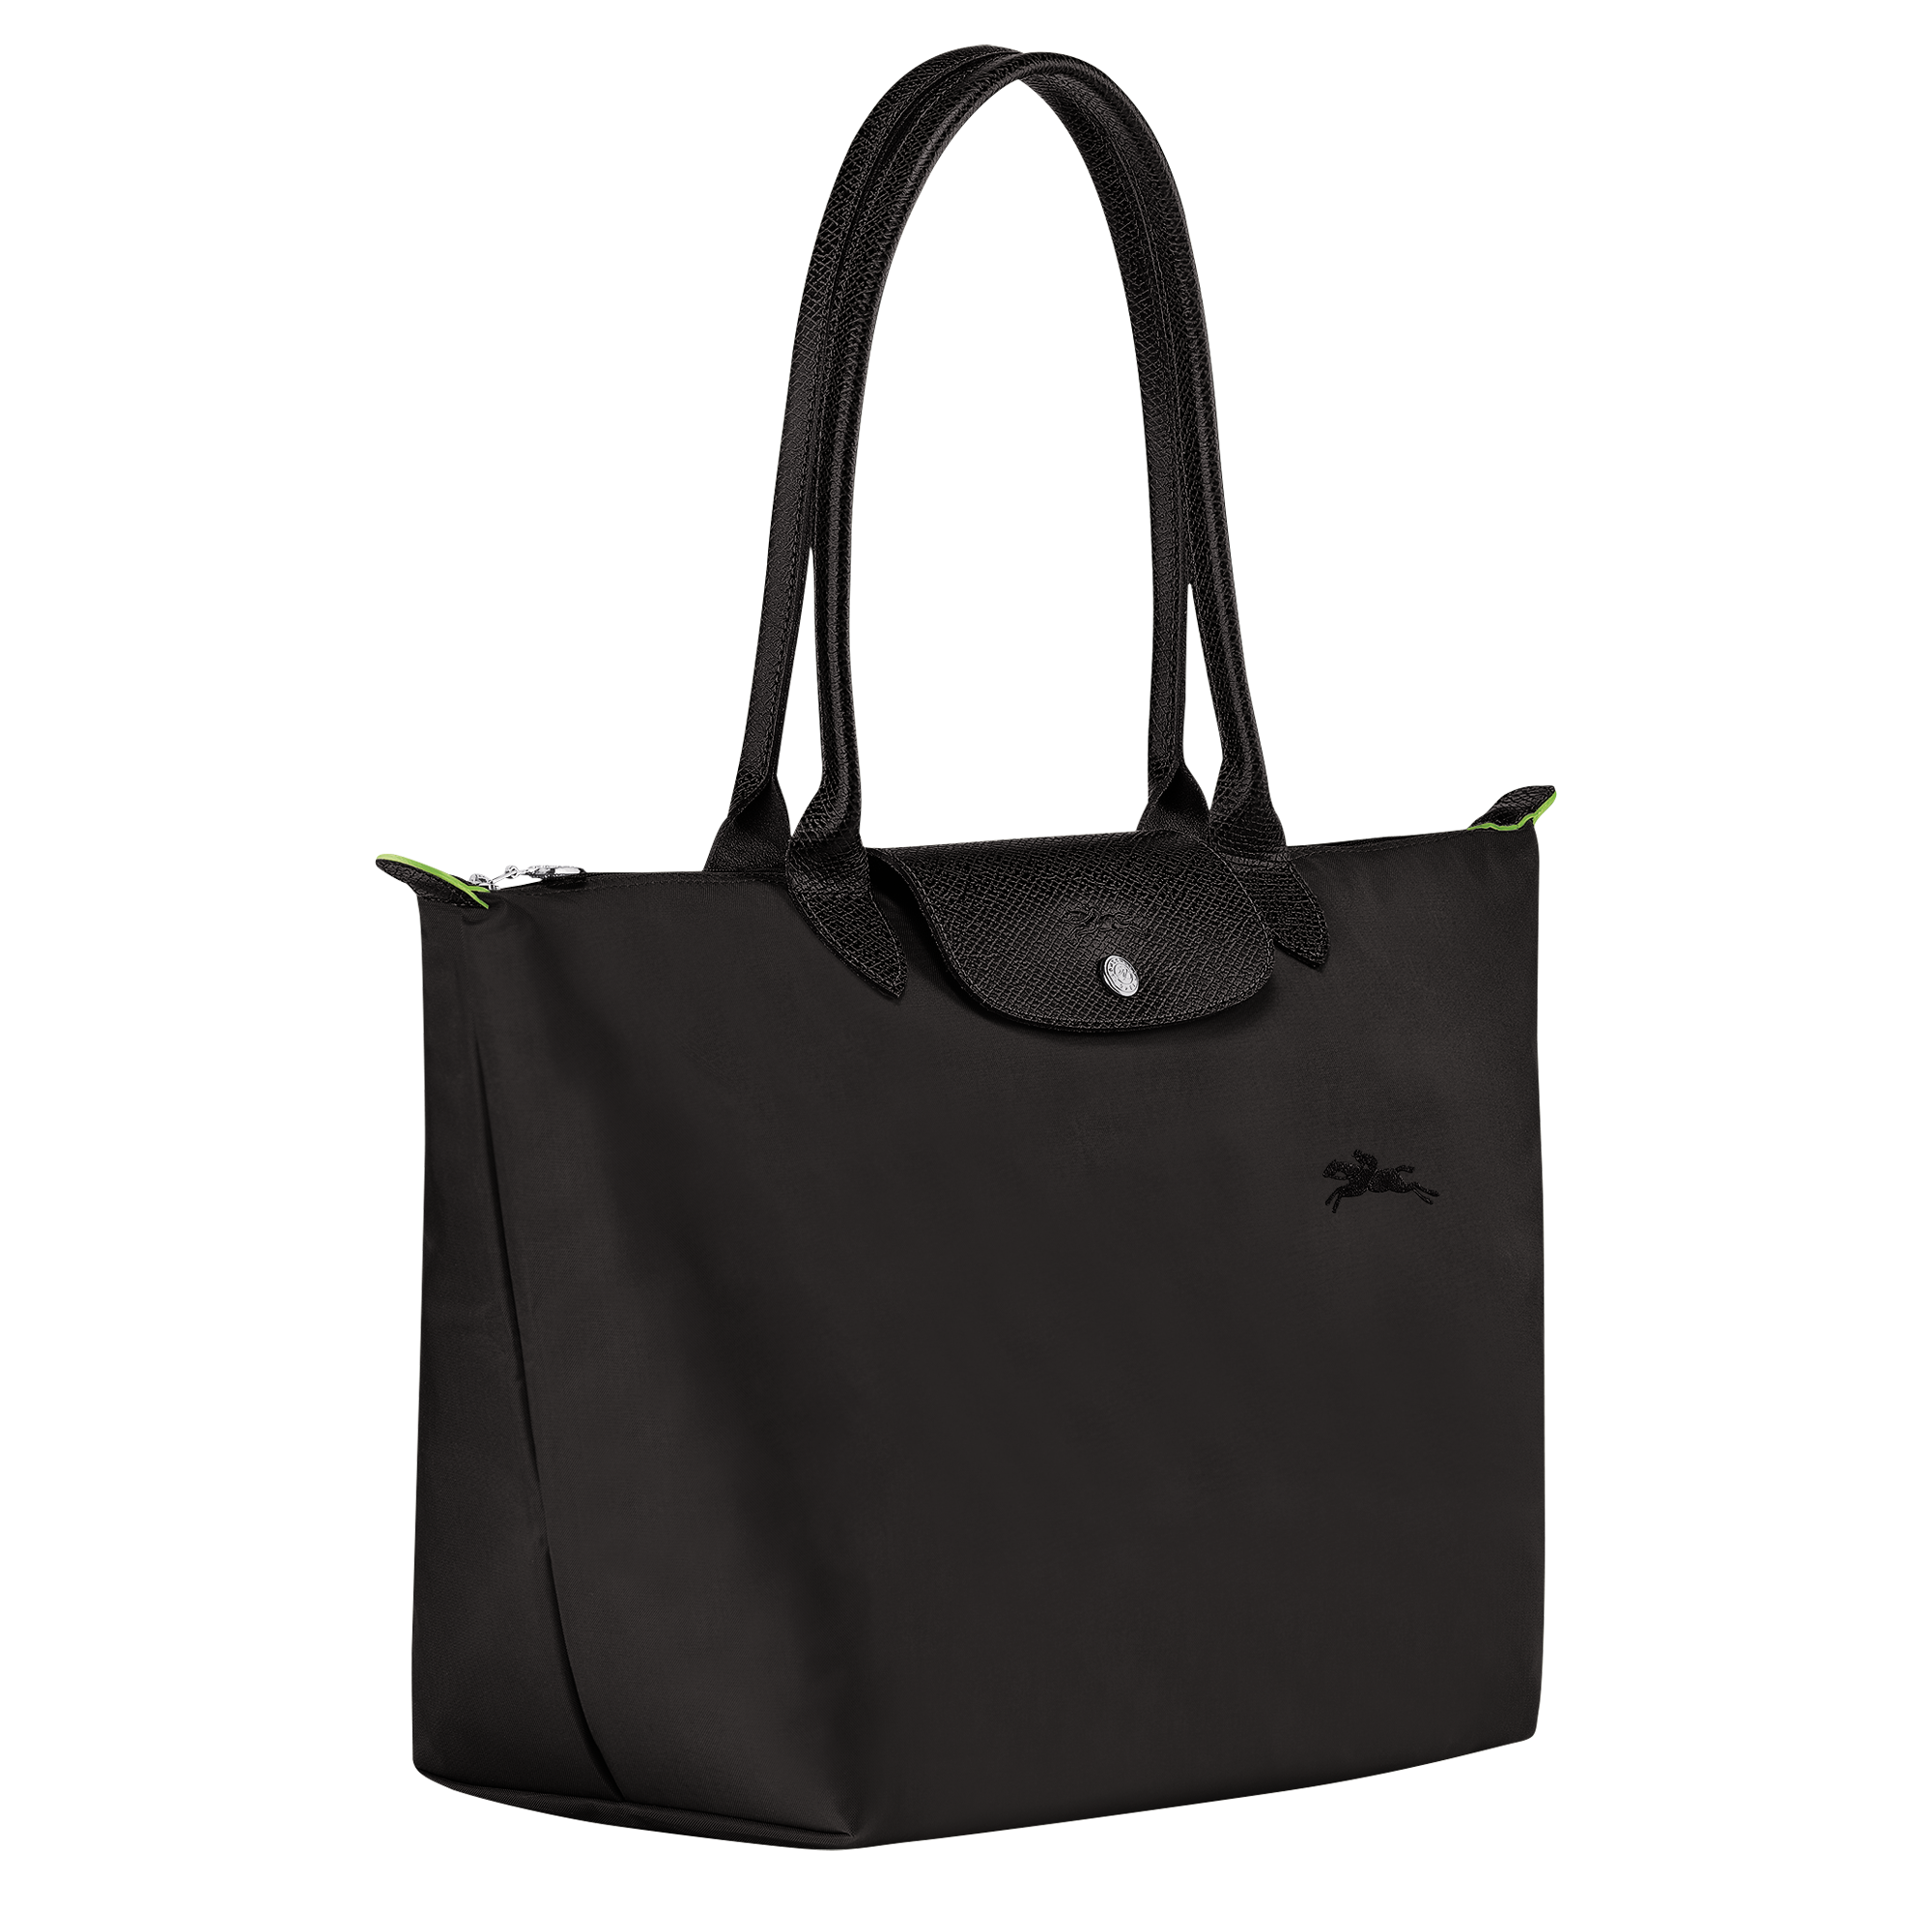 Longchamp Leather Tote Bags for Women for sale